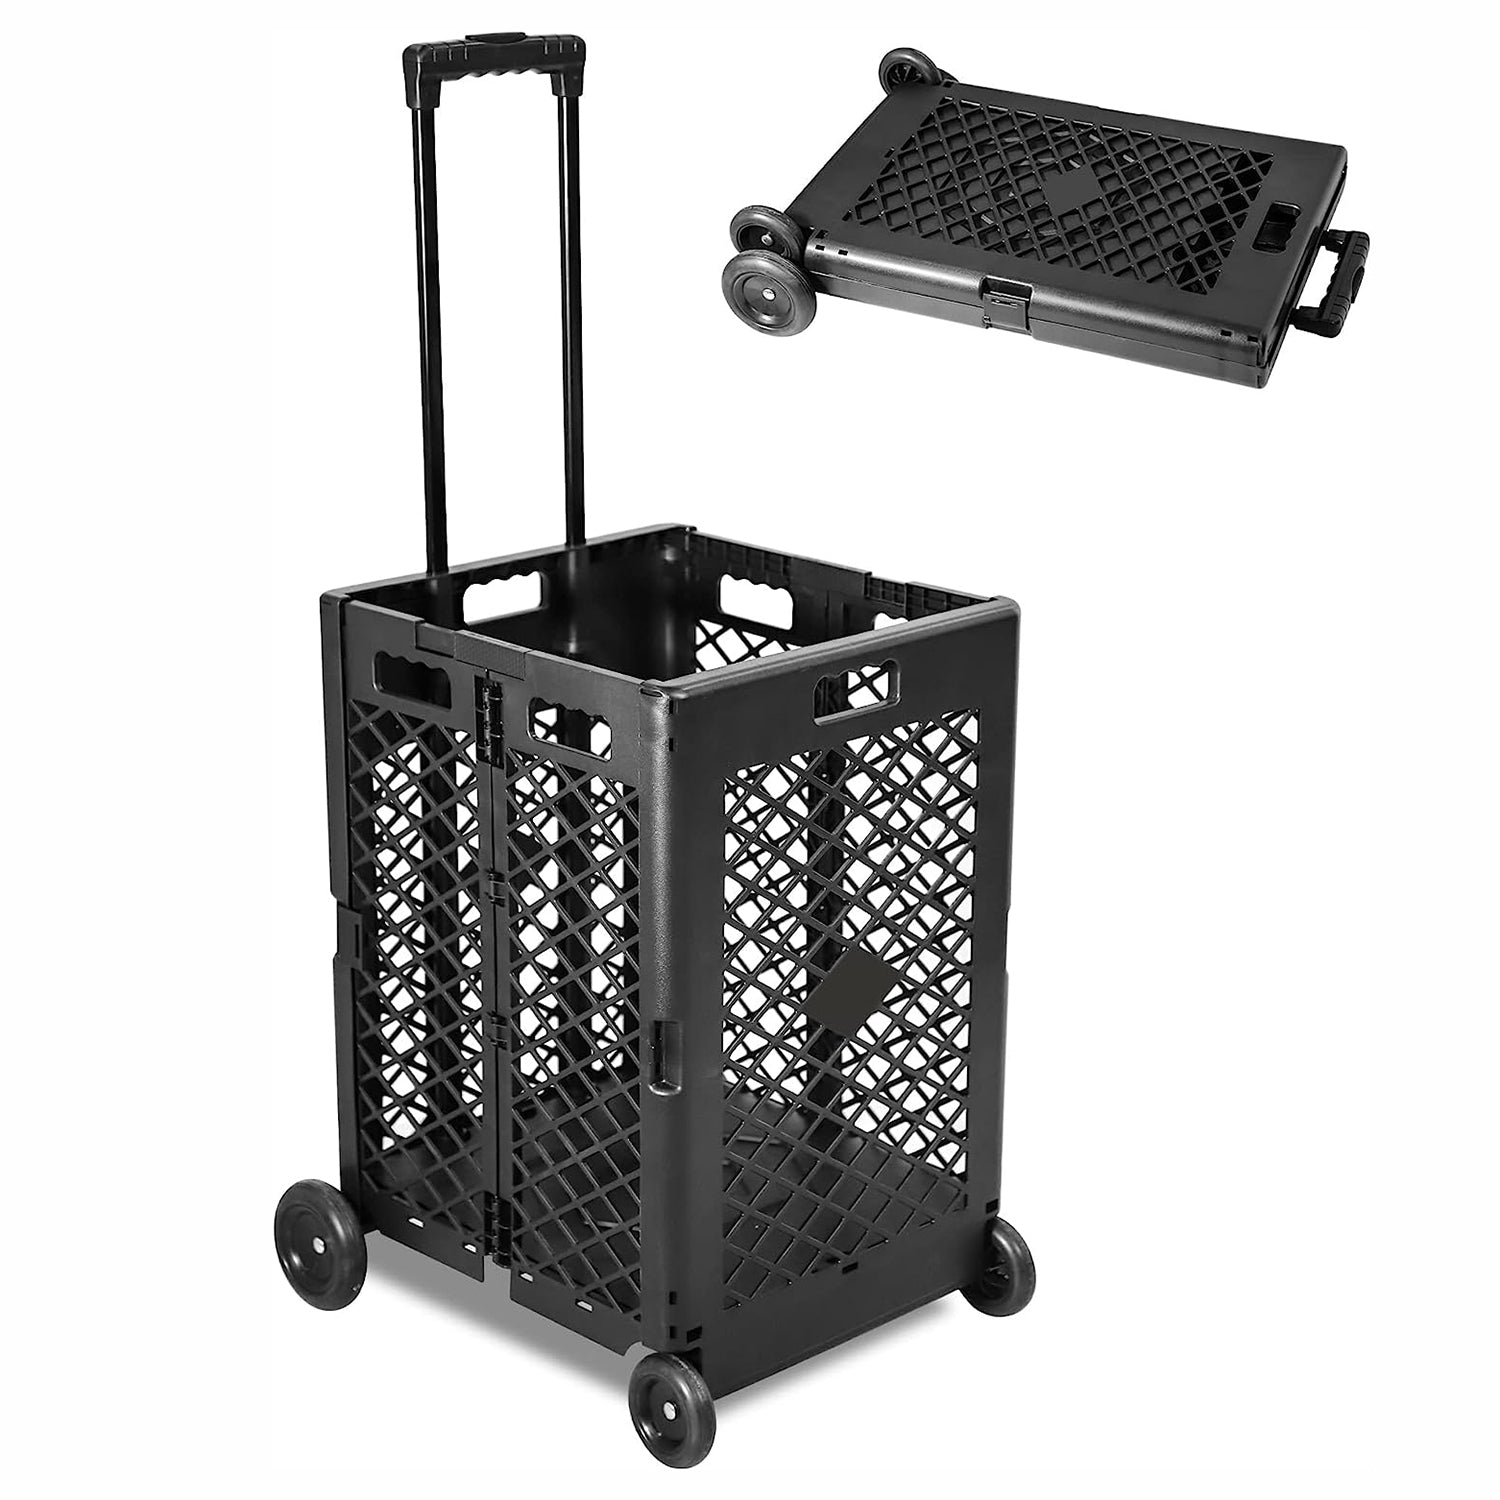 Luckyermore Foldable Rolling Crate with Wheels Collapsible Basket with Telescopic Handle, 66 lbs Capacity for Shopping, Travel, Laundry, Black